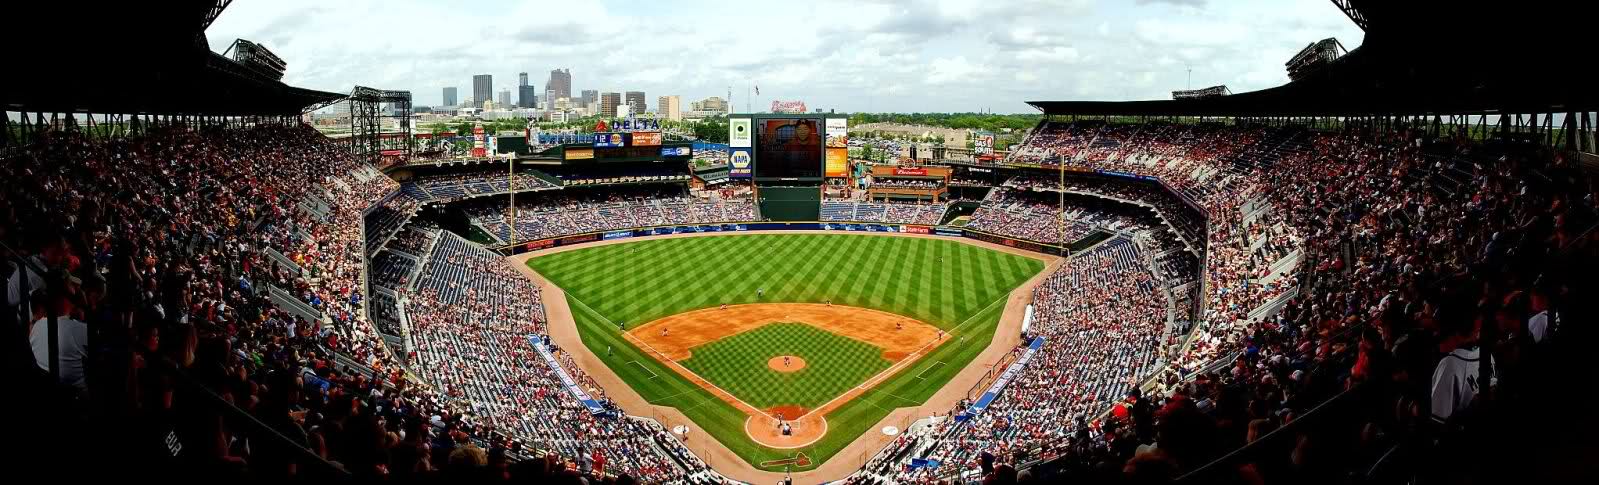 Turner Field Photography Available For Photomatches